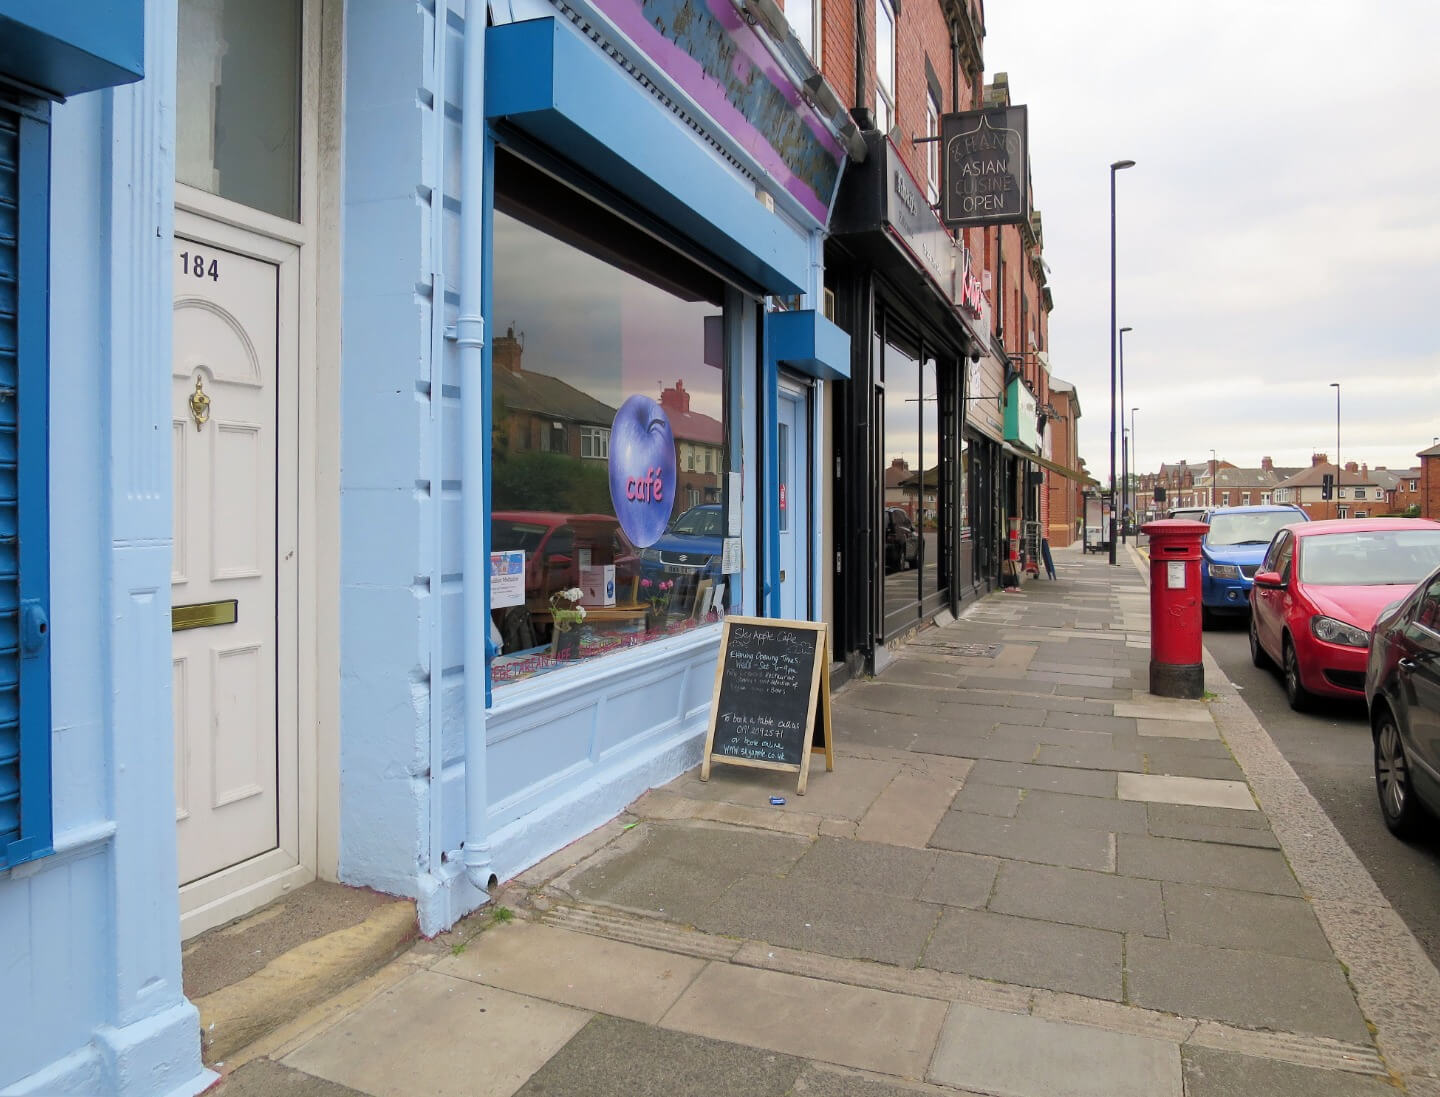 Student Accommodation in Heaton, Newcastle - row of shops and cafes on Heaton Road